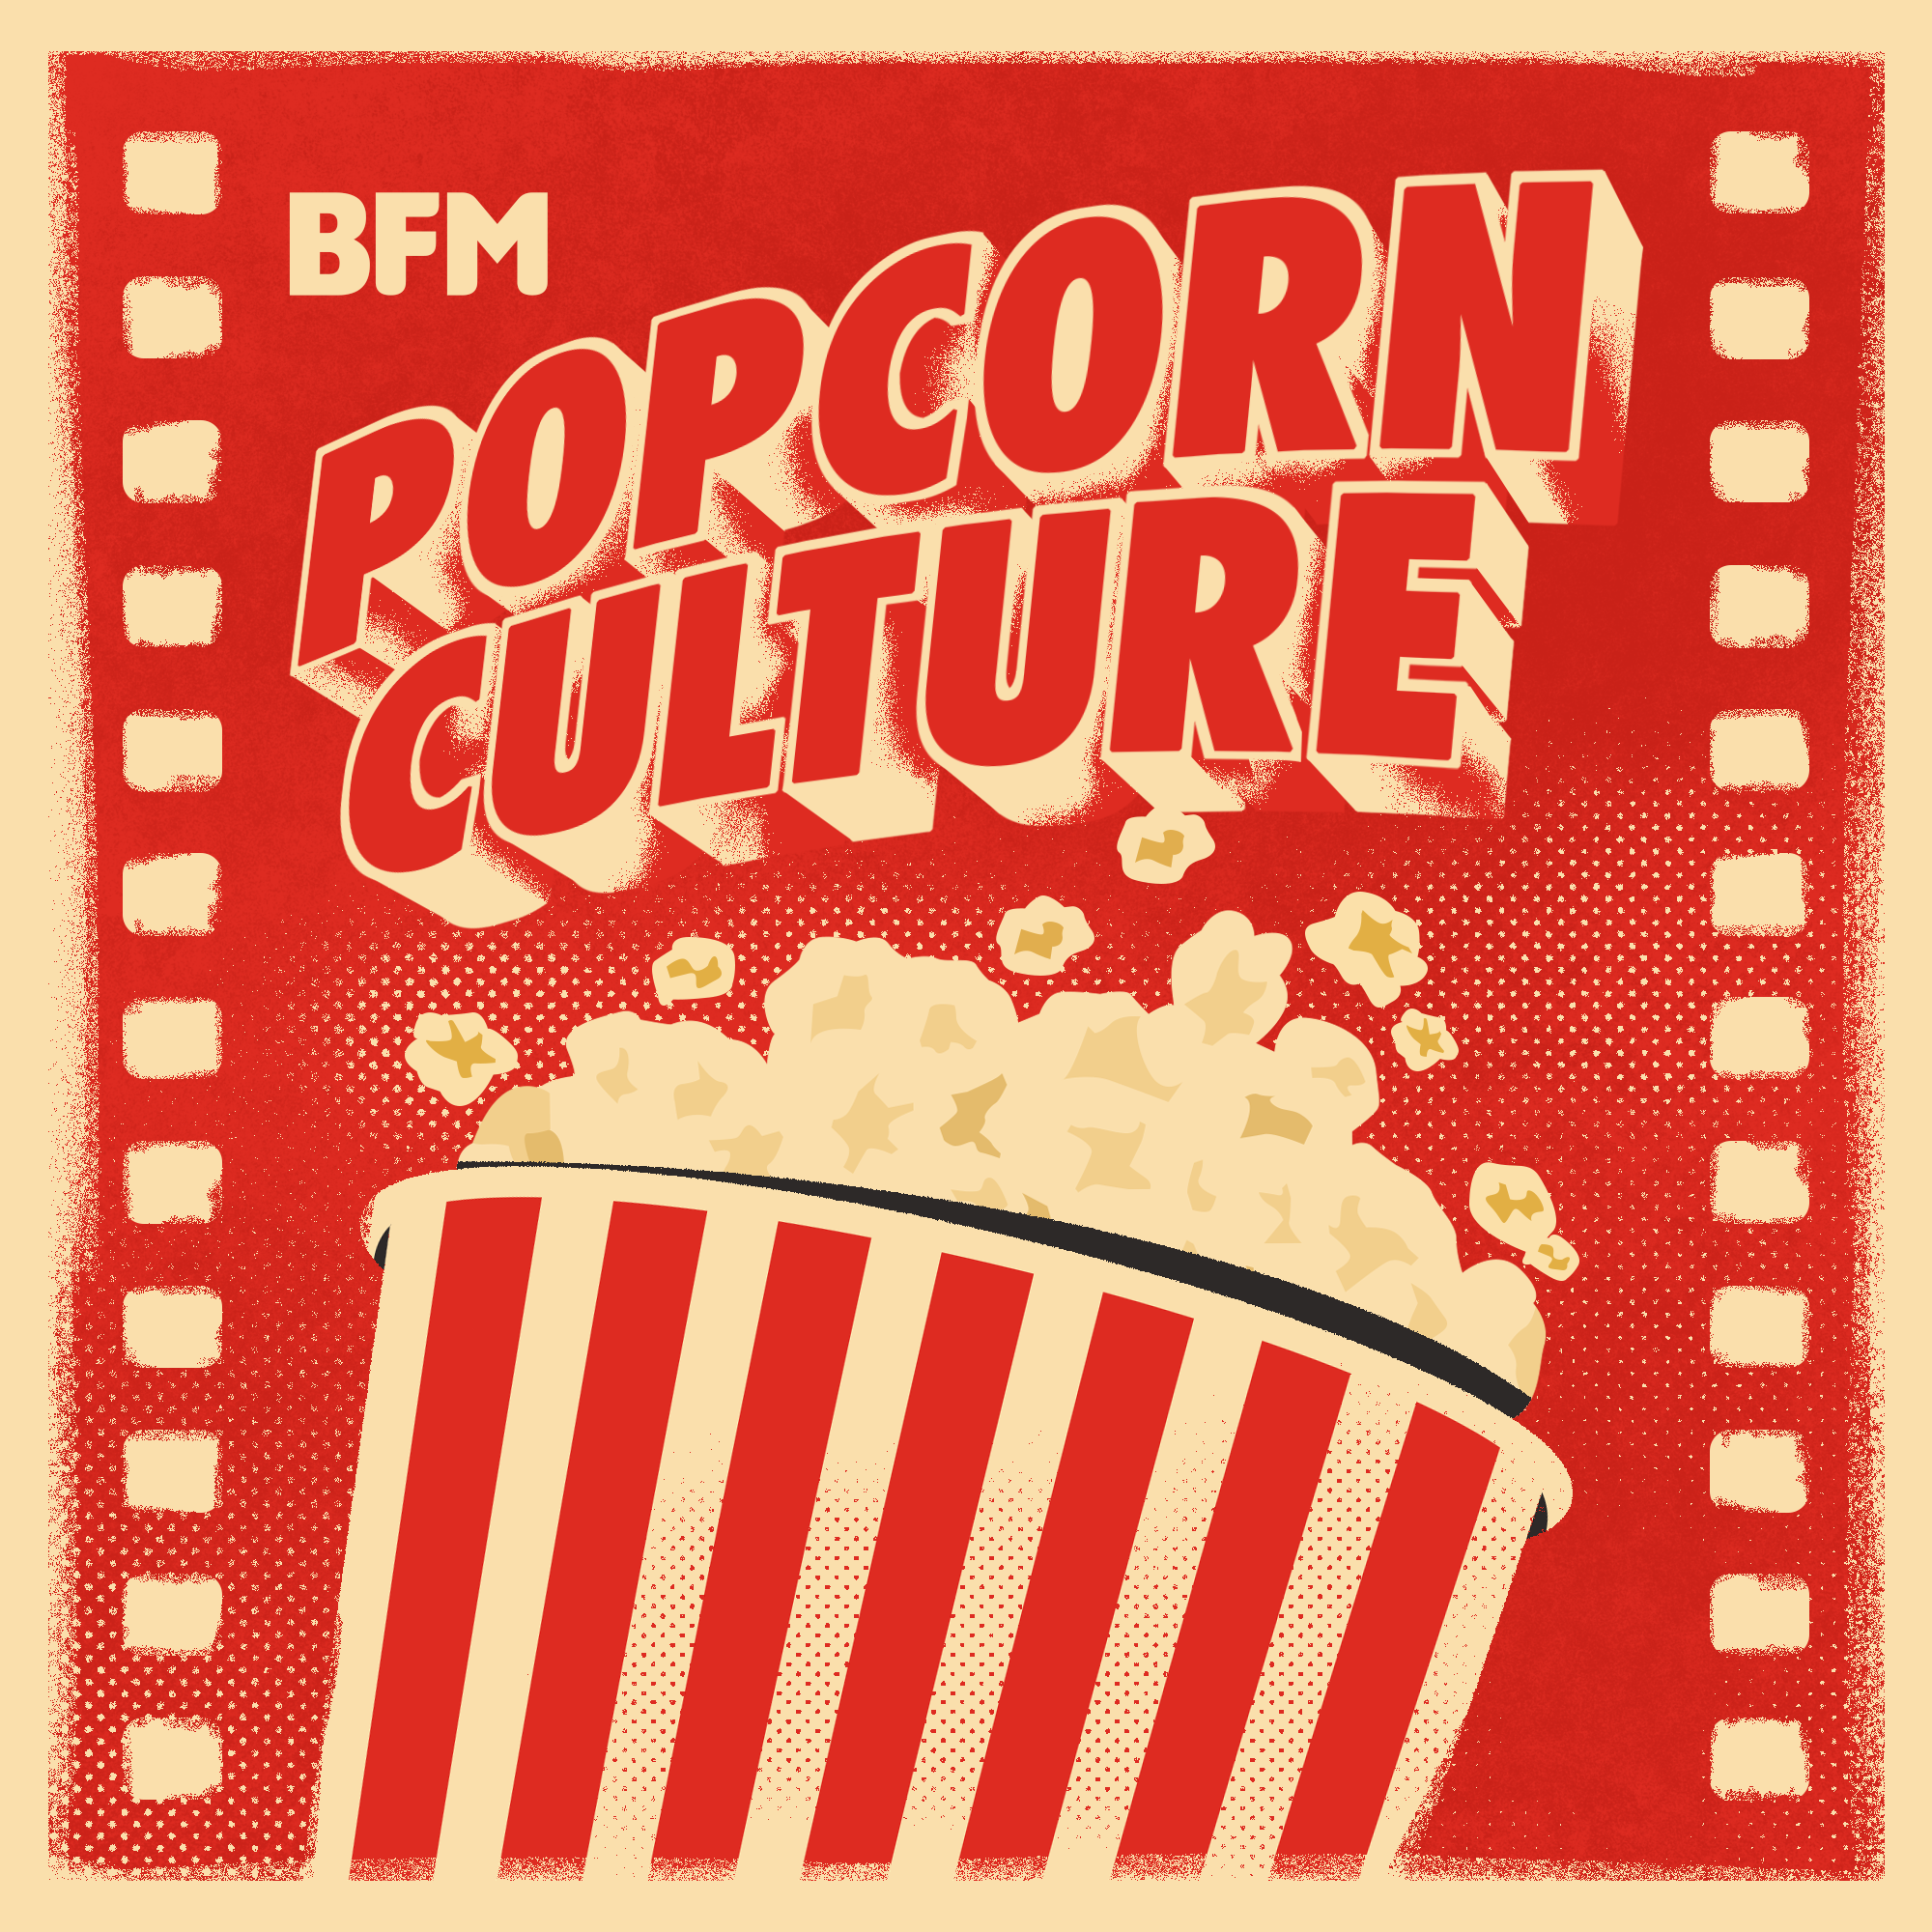 Popcorn Culture - Review: You People